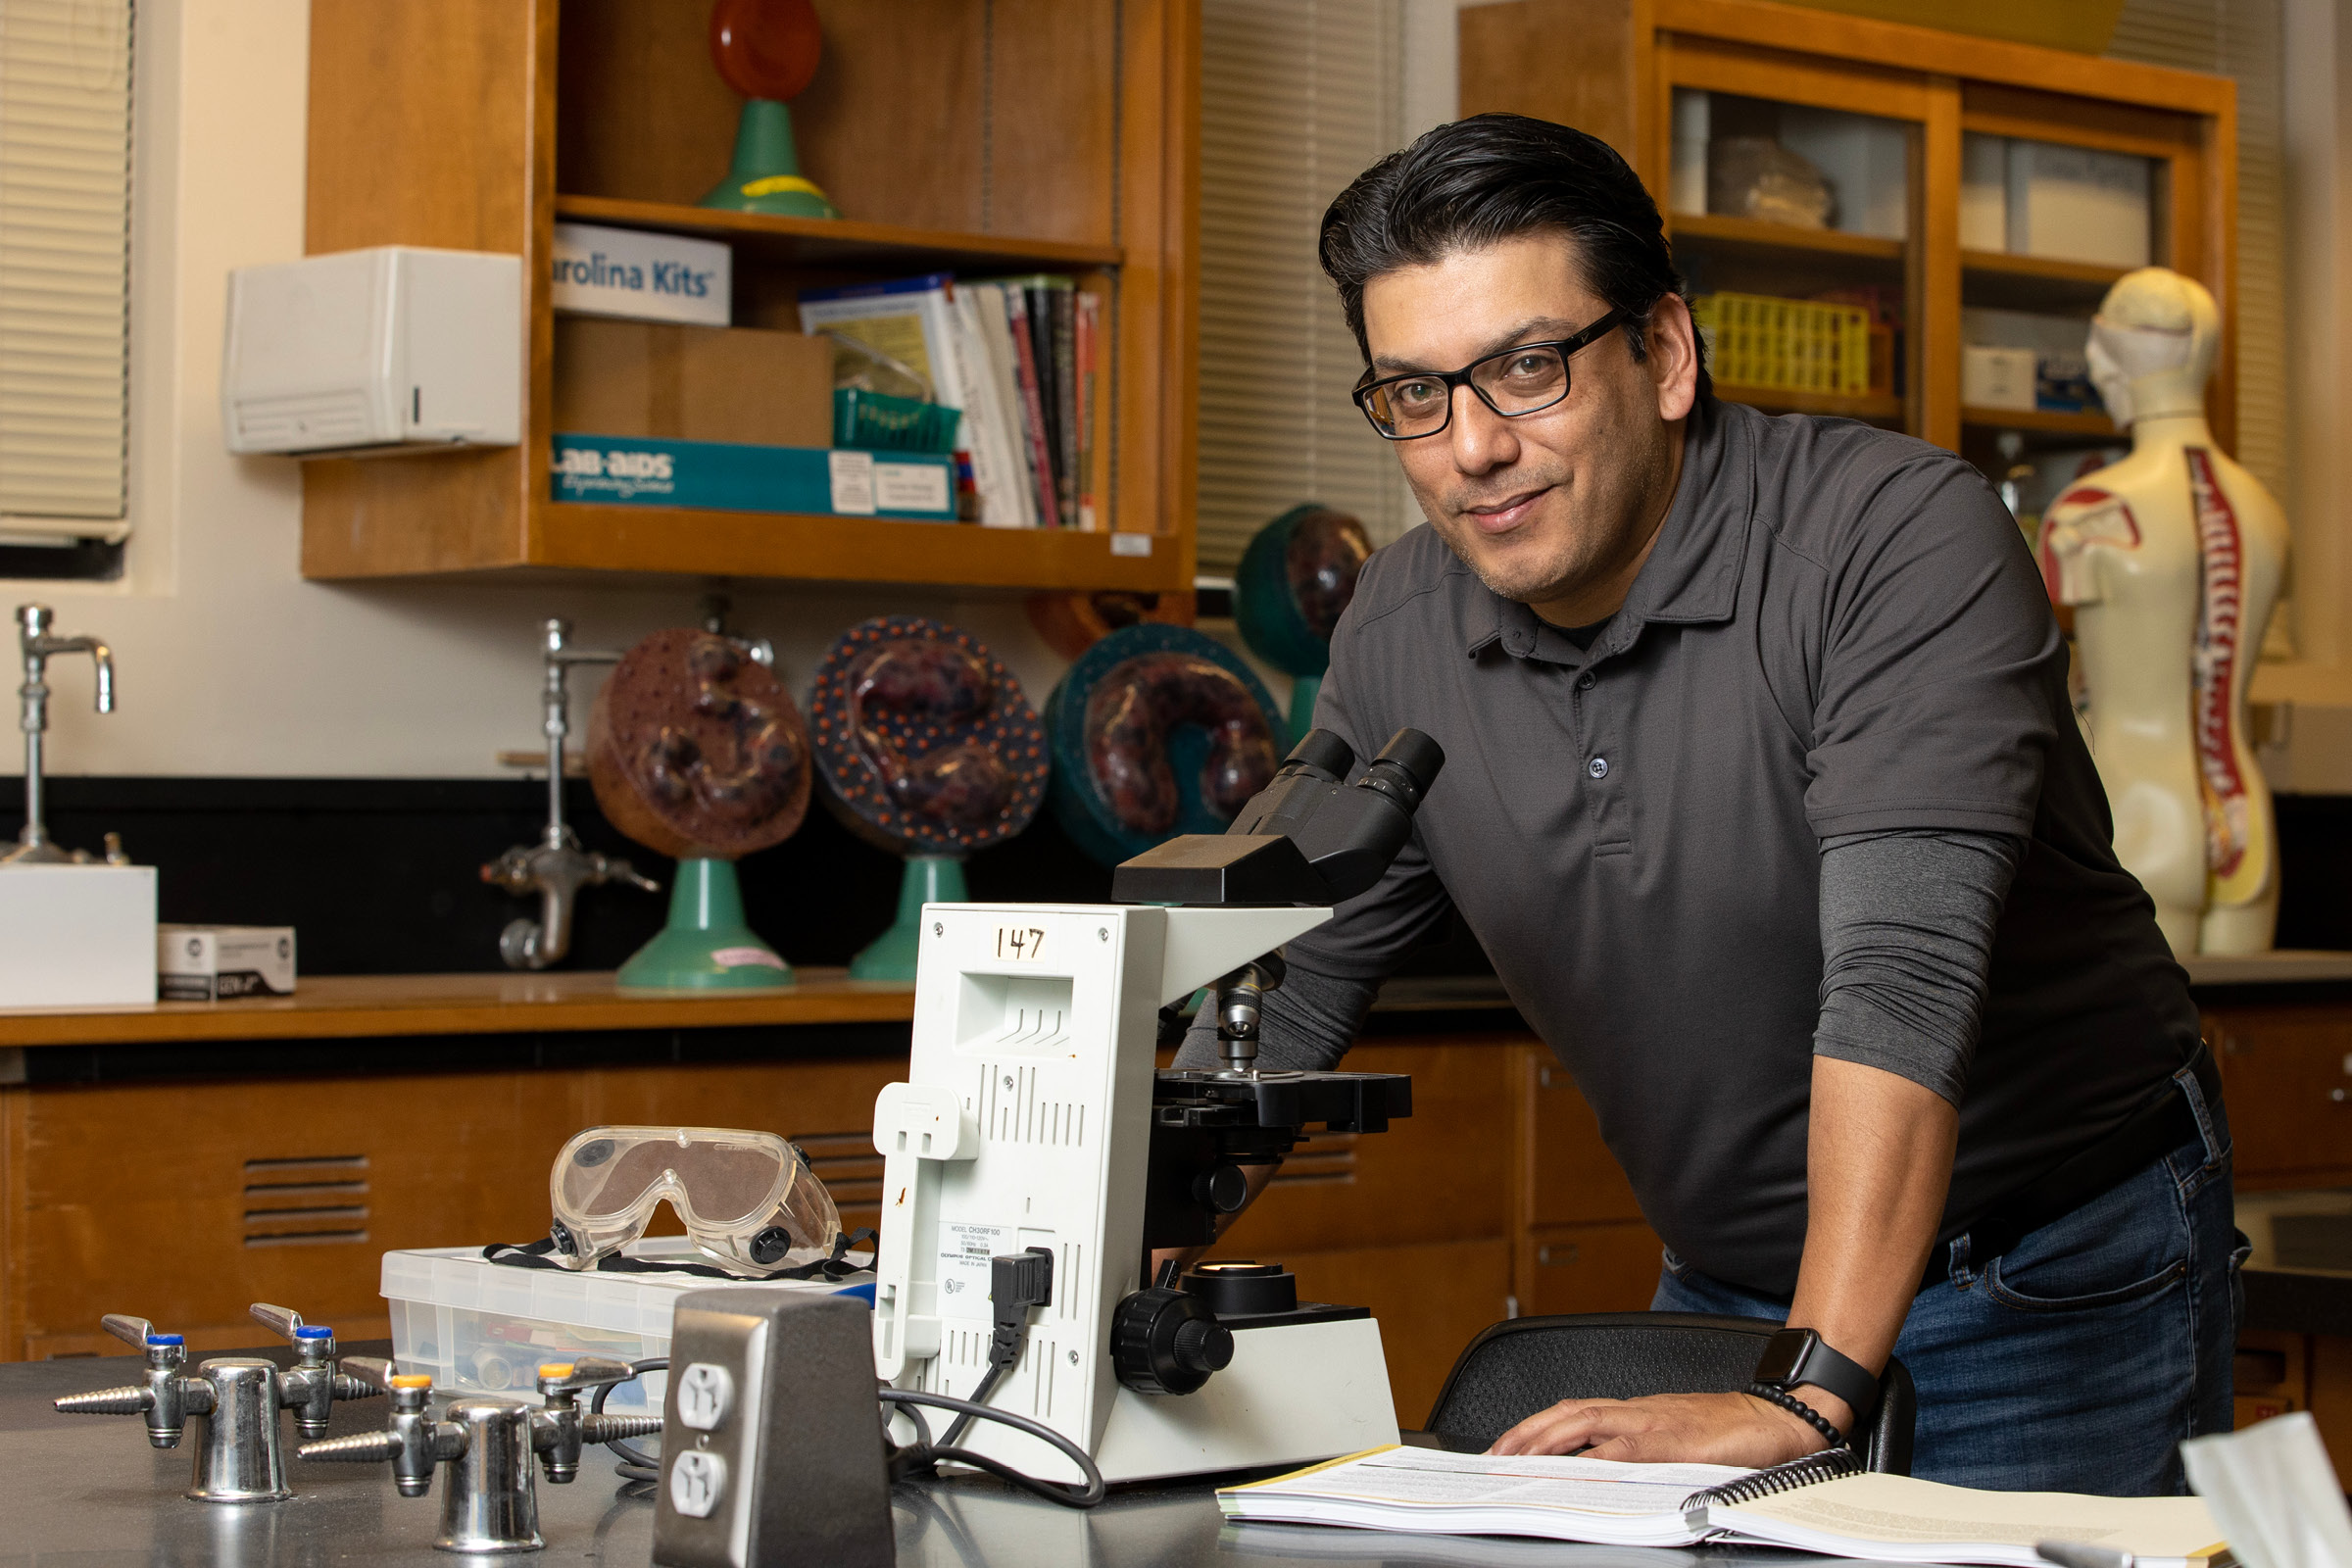 Jeremy Saavedra, biology student in the College of Natural Sciences